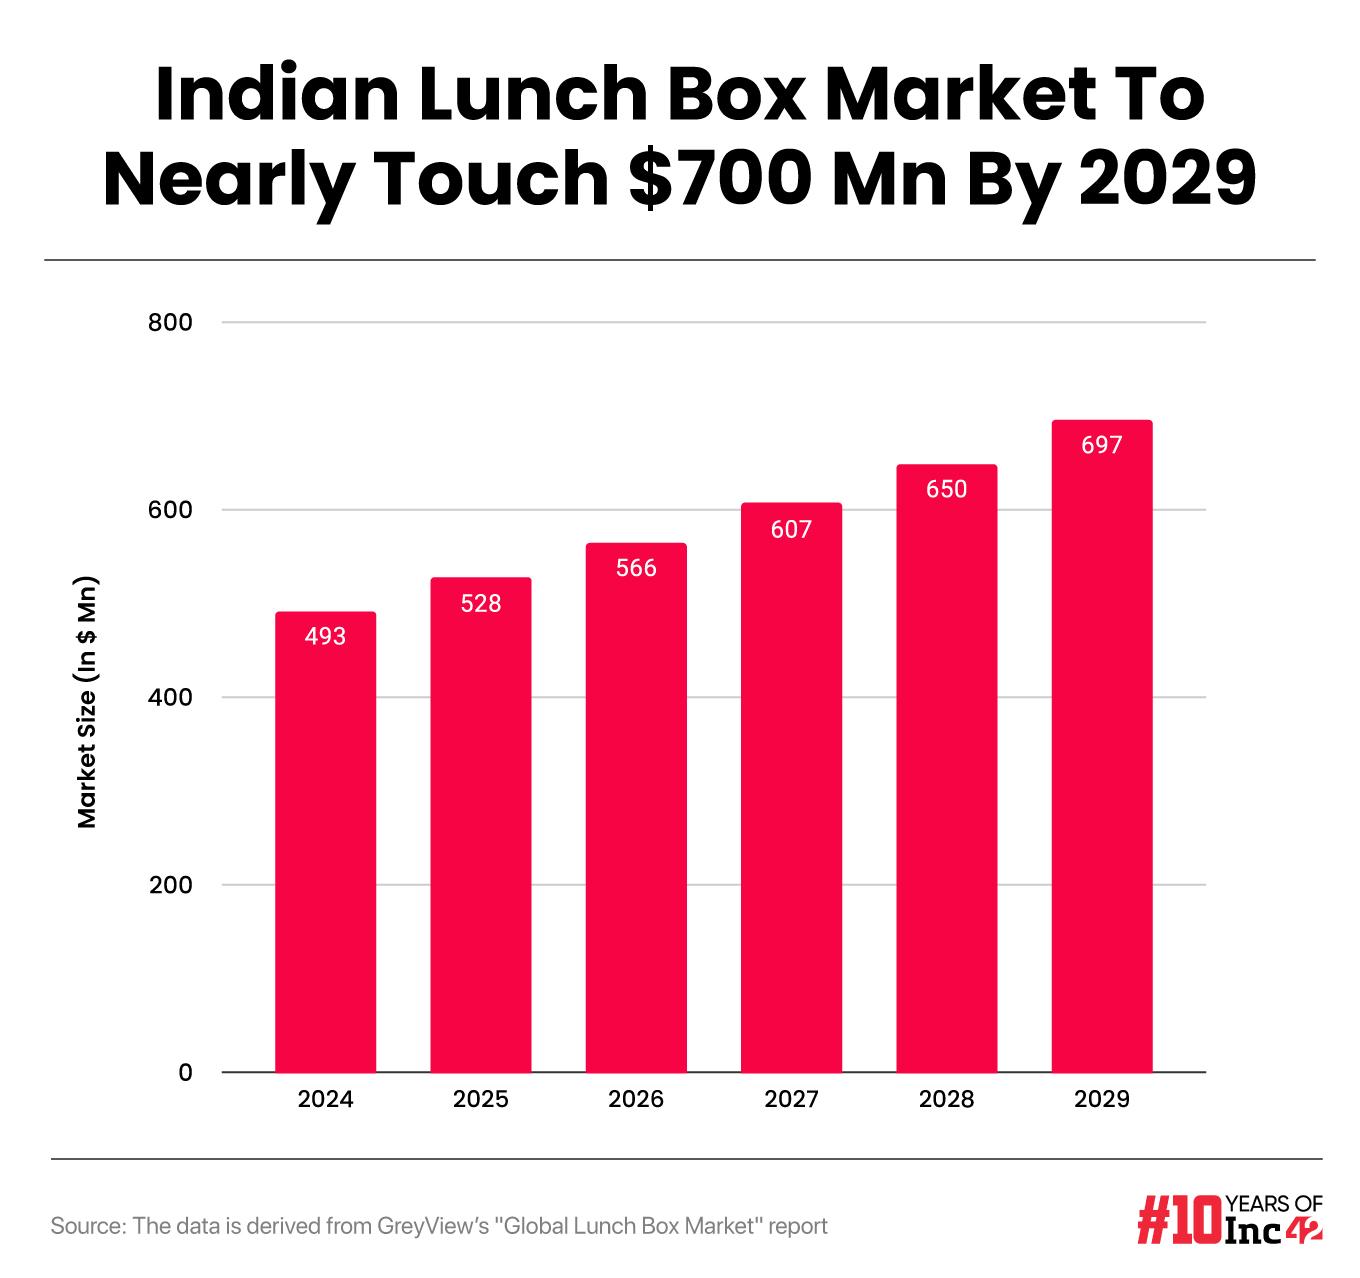 How D2C Brand Basil Aspires To Take On Tupperware & Milton In The Indian Lunchbox Segment